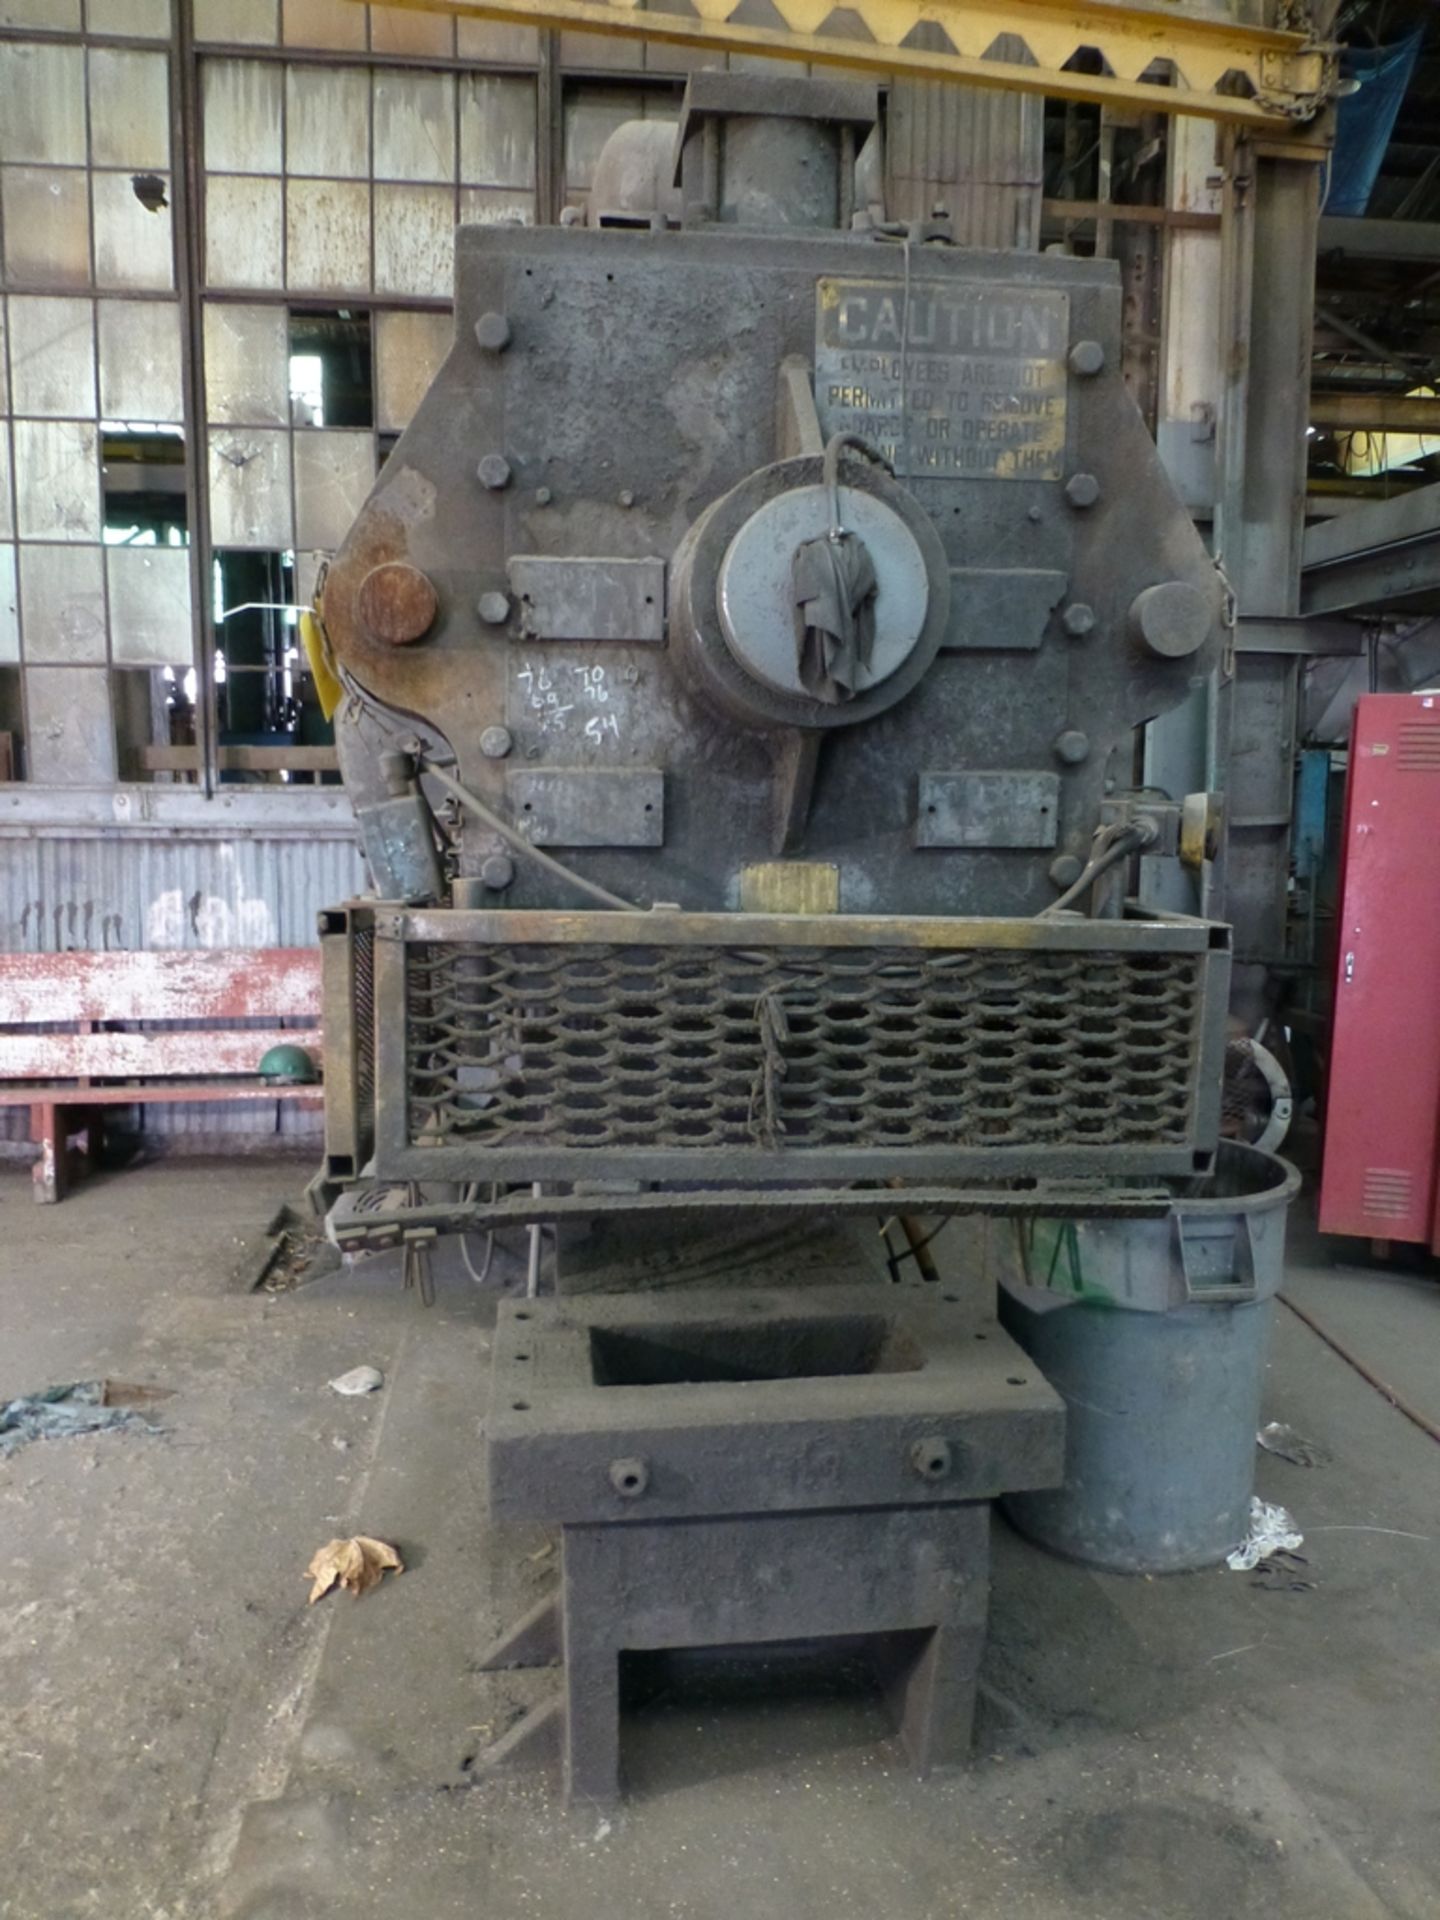 Beatty 425 Ton Mechanical C-Frame Press|Model No. 12; S/N: 20130; 21" x 34 1/2" Bed - Image 2 of 7